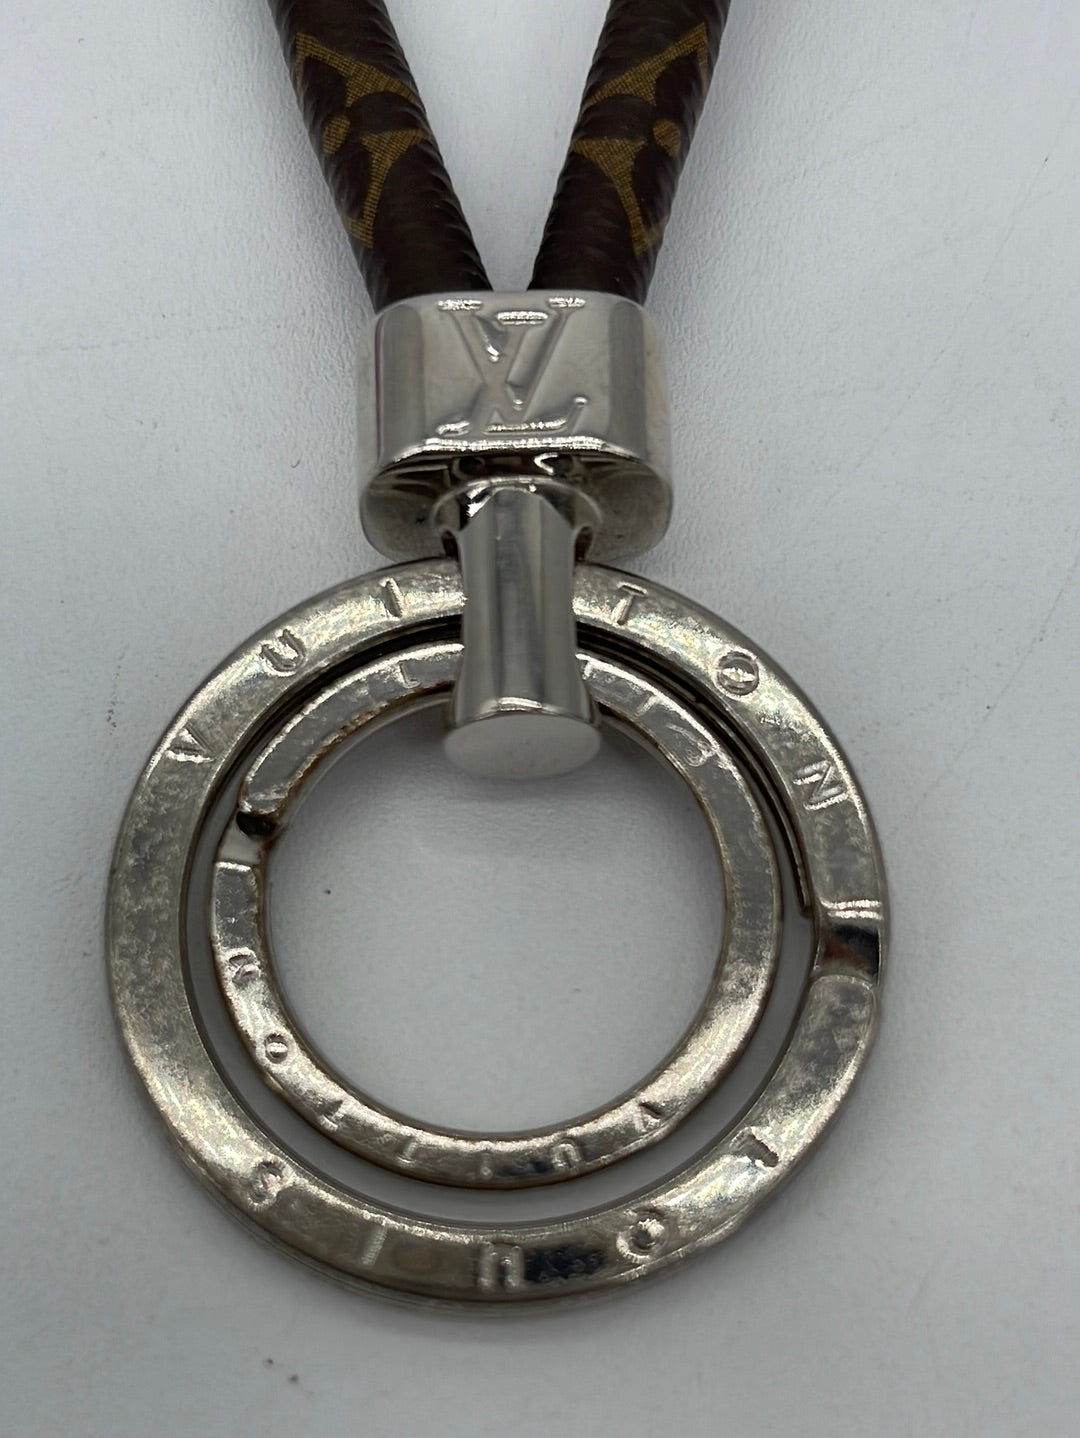 Louis Vuitton 6 Ring Key Holder in Monogram M62630 for Sale in Sunny Isles  Beach, FL - OfferUp